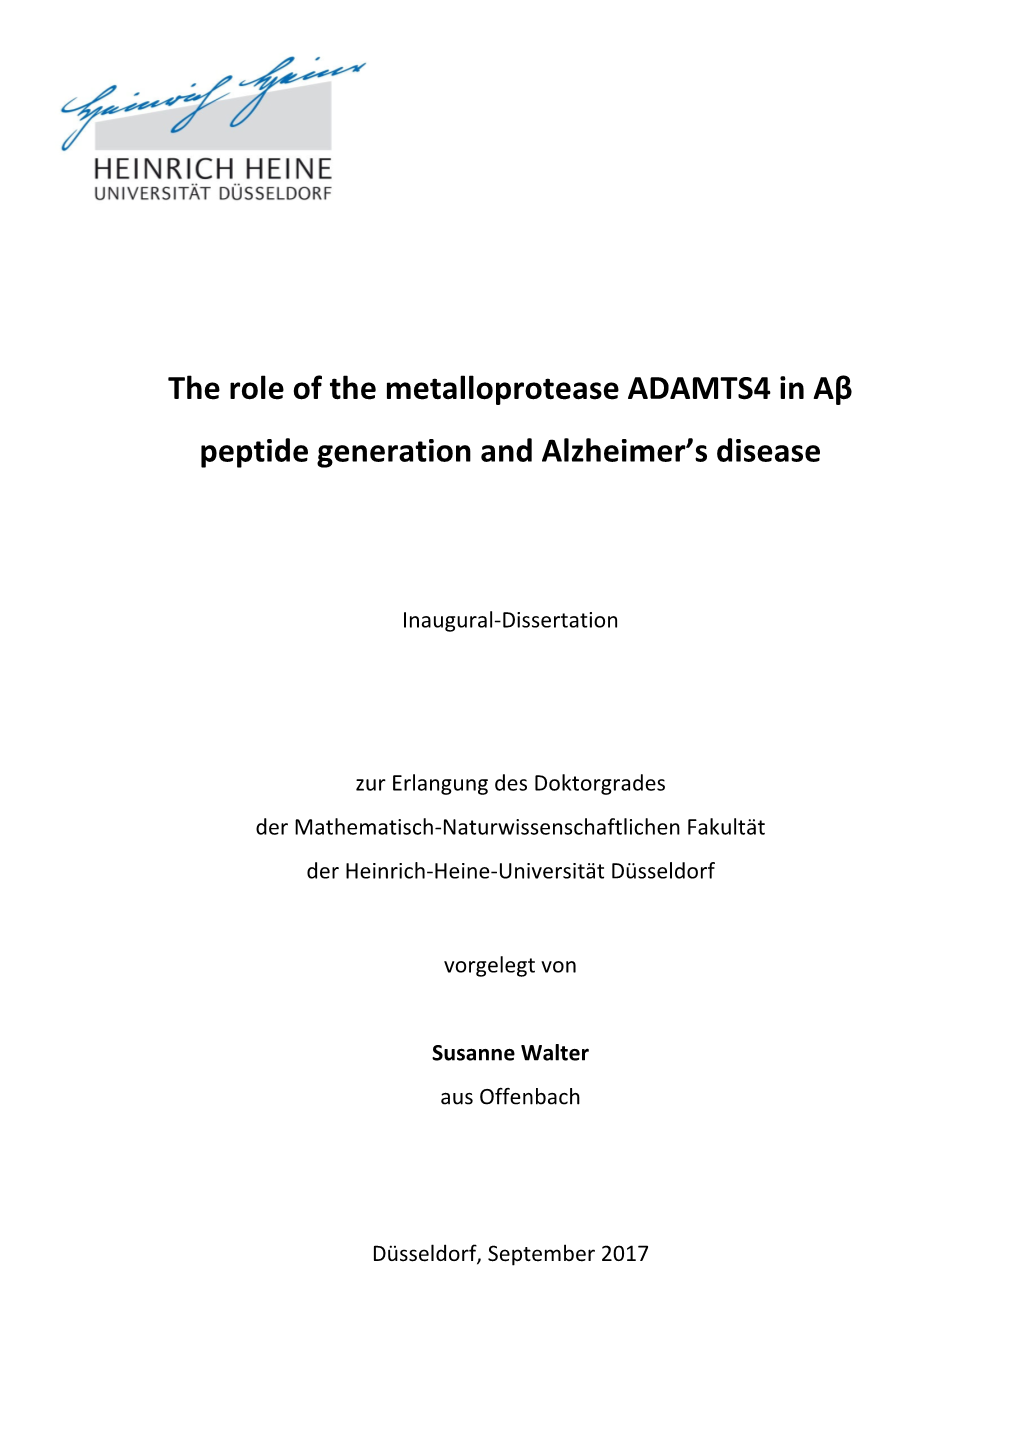 The Role of the Metalloprotease ADAMTS4 in Aβ Peptide Generation and Alzheimer’S Disease